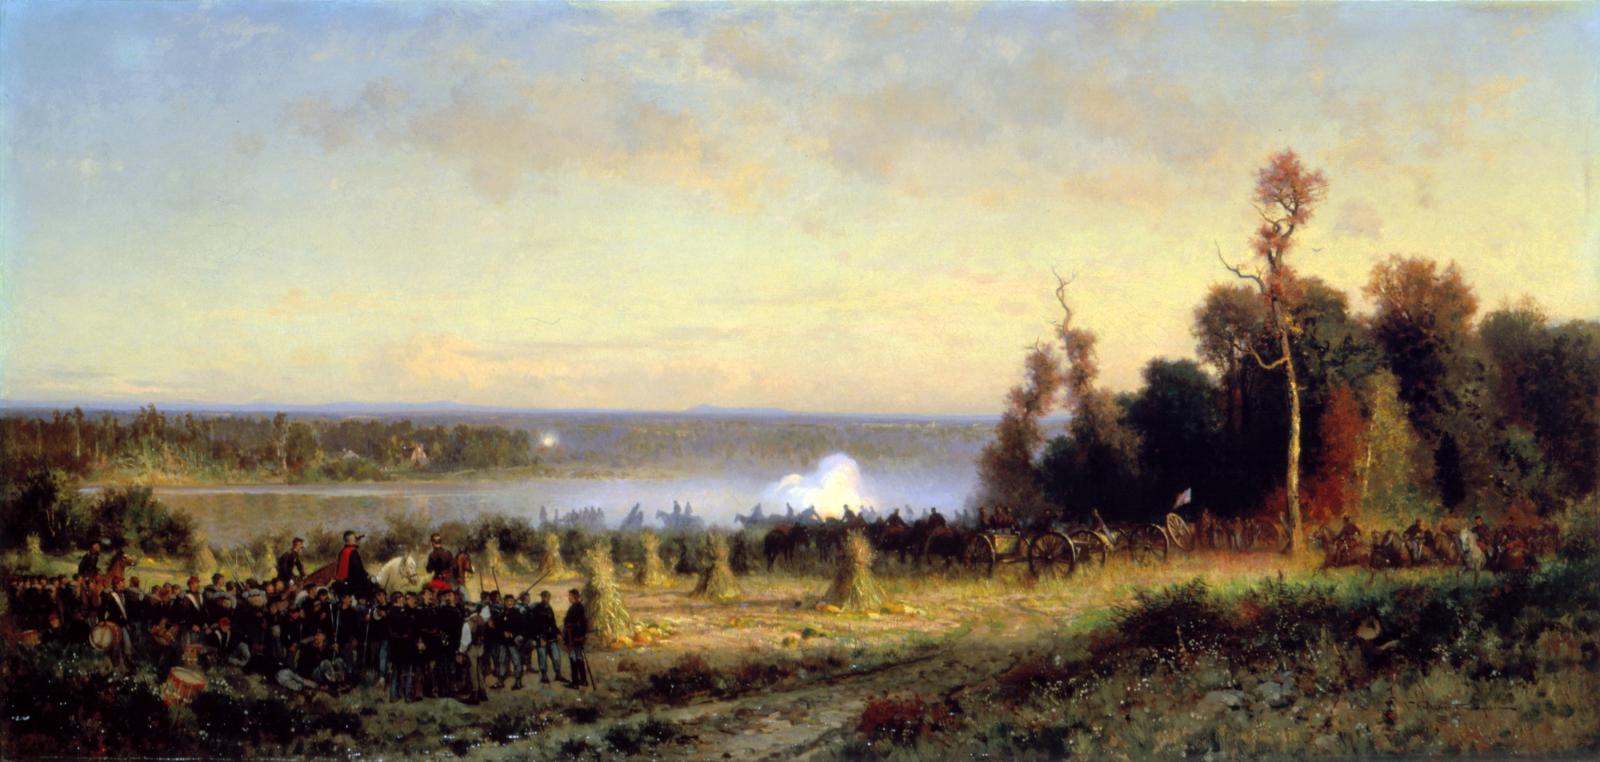 Cannonading_on_the_Potomac_by_Alfred_W_Thompson,_c1869.jpg